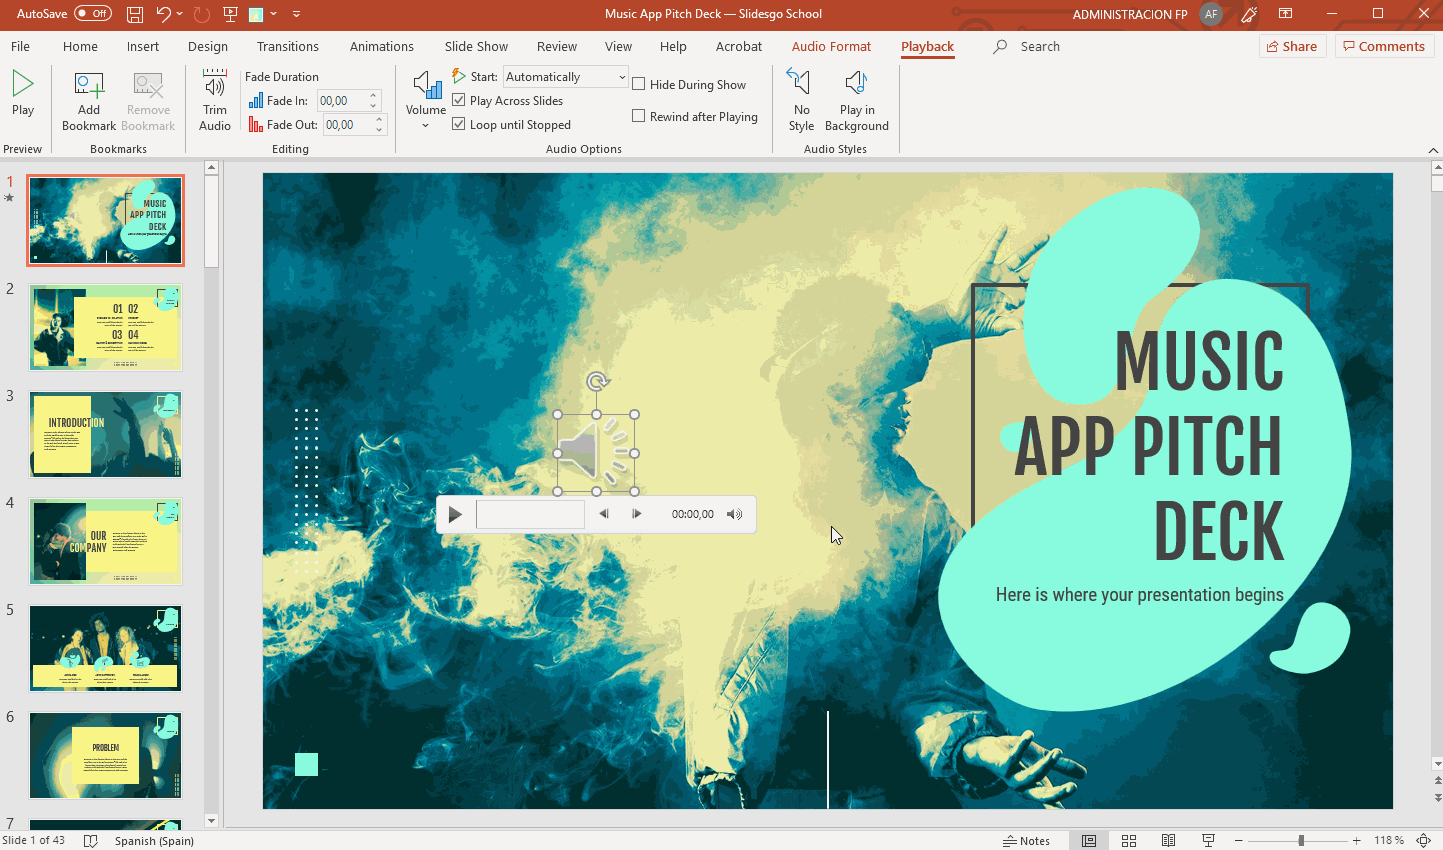 How to Add, Record or Edit Audio or Music in PowerPoint -13